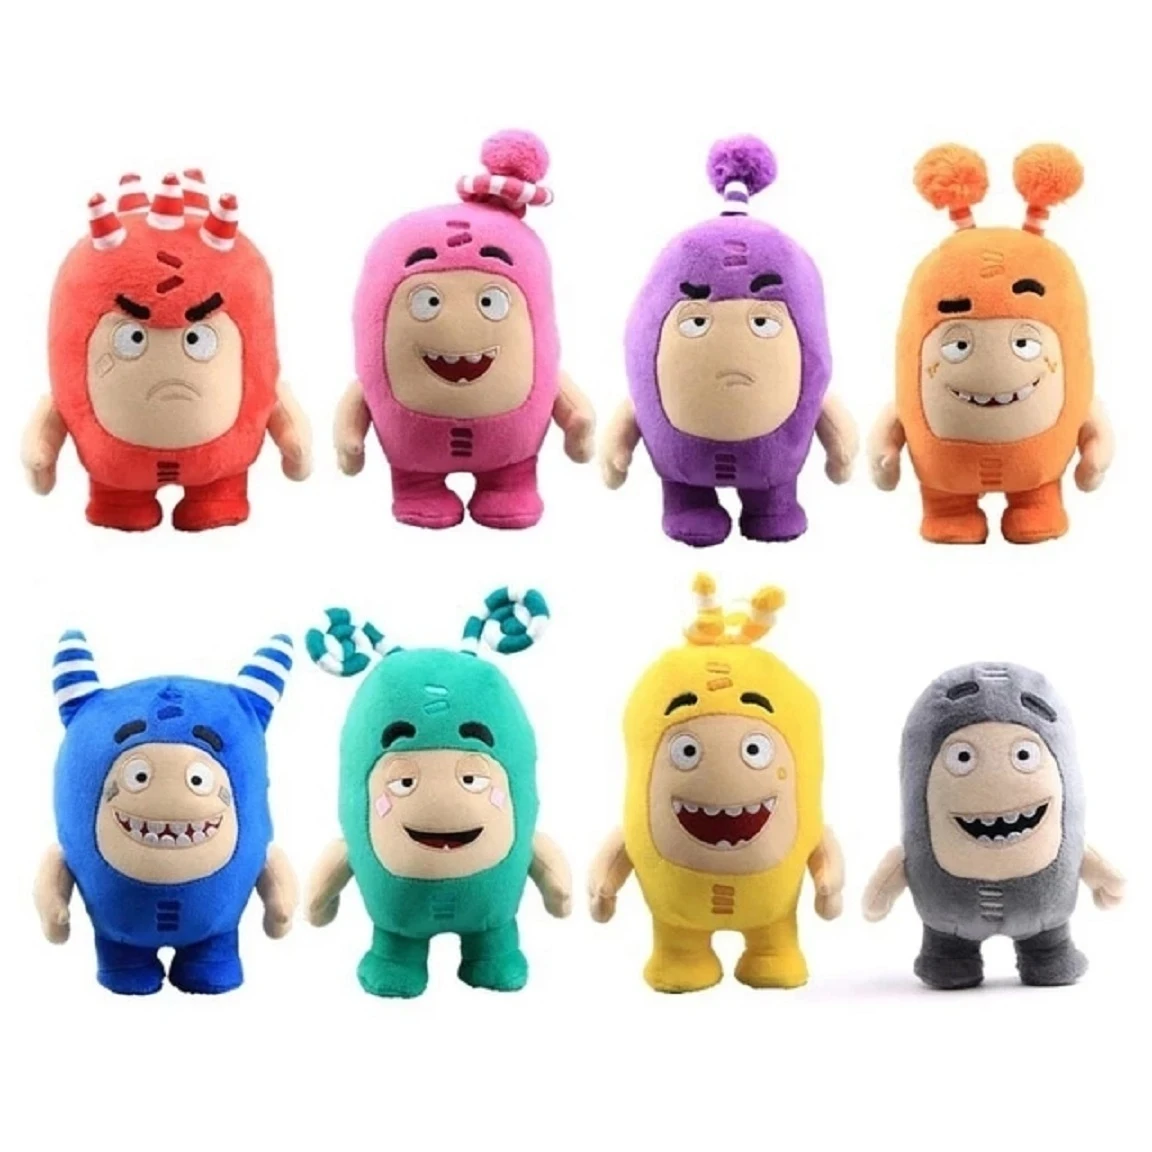 8pcs/Lot Oddbods Cartoon 18-24CM Fuse Jeff Newt Odd ZEE Bods Stuffed Plush Toy Doll For Kids Gifts PP Cotton Home Decoration 4 8pcs blank words flashcards simple style memo cards students english words memory cards office students home memory notepads